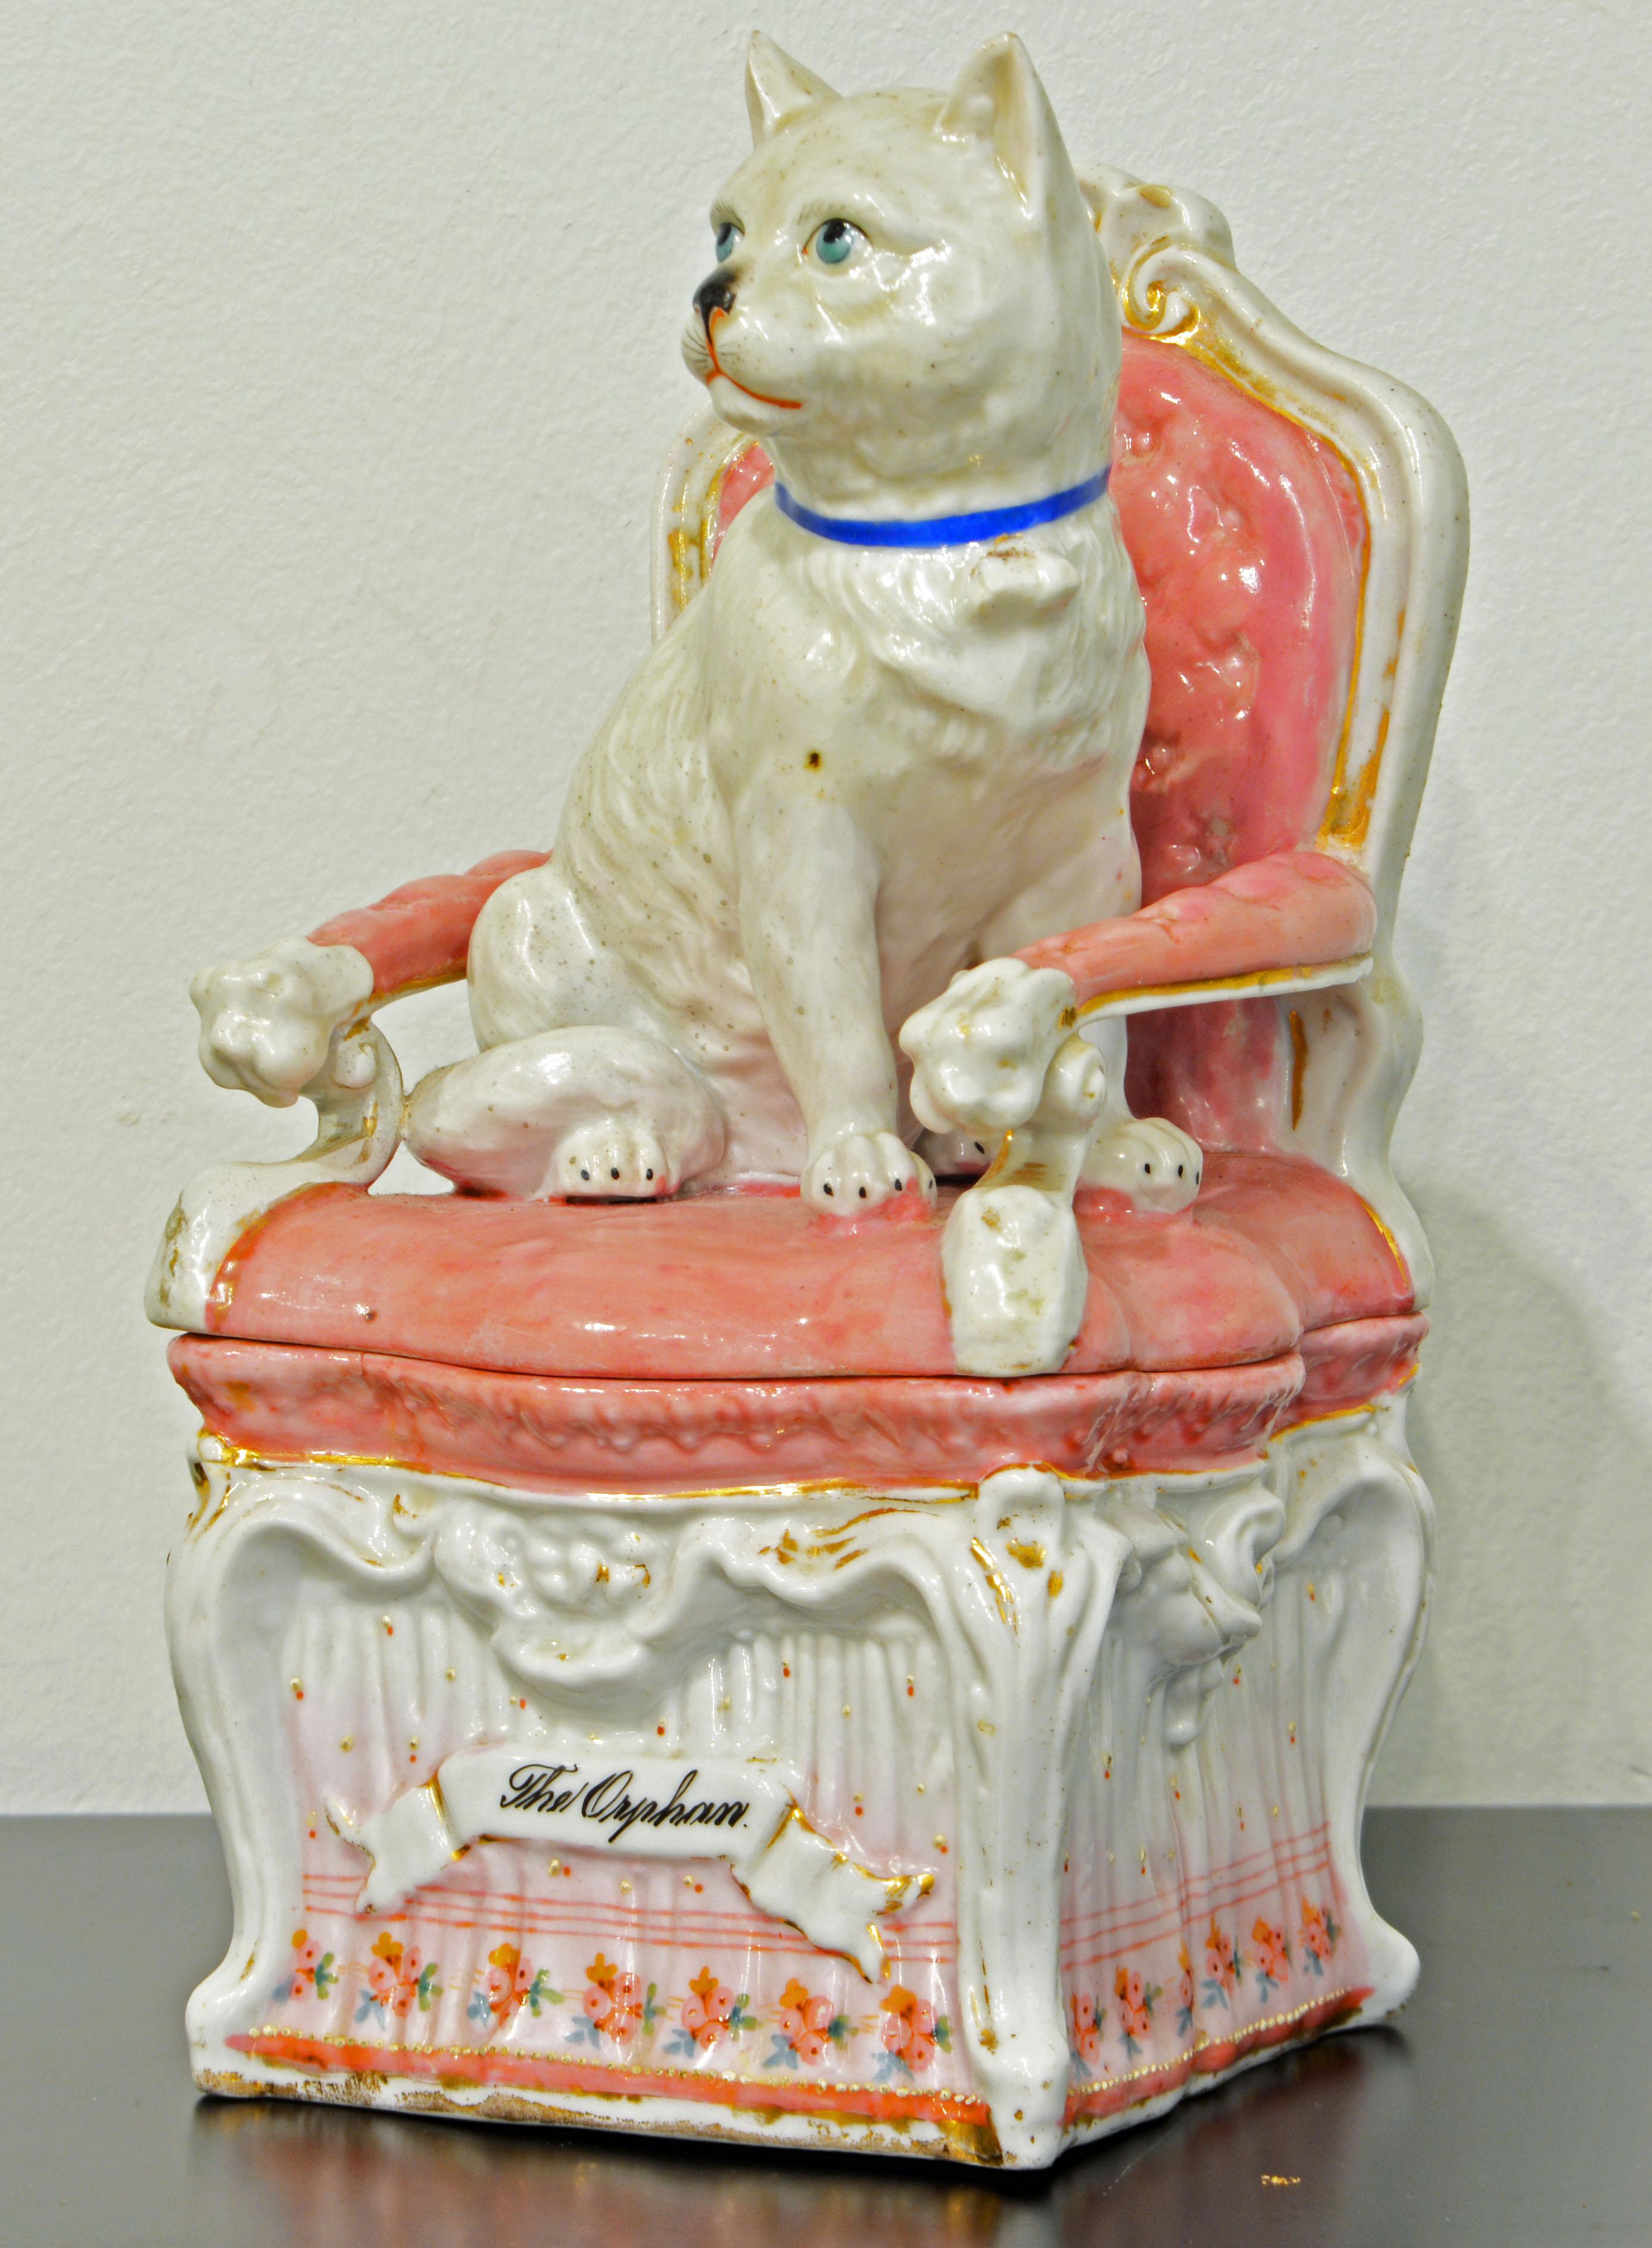 This lovely late 19th century Staffordshire figure of a white cat with blue eyes and collar sitting proudly on a fine rococo chair consists of a top and a bottom part creating a nice little space for keepsakes.